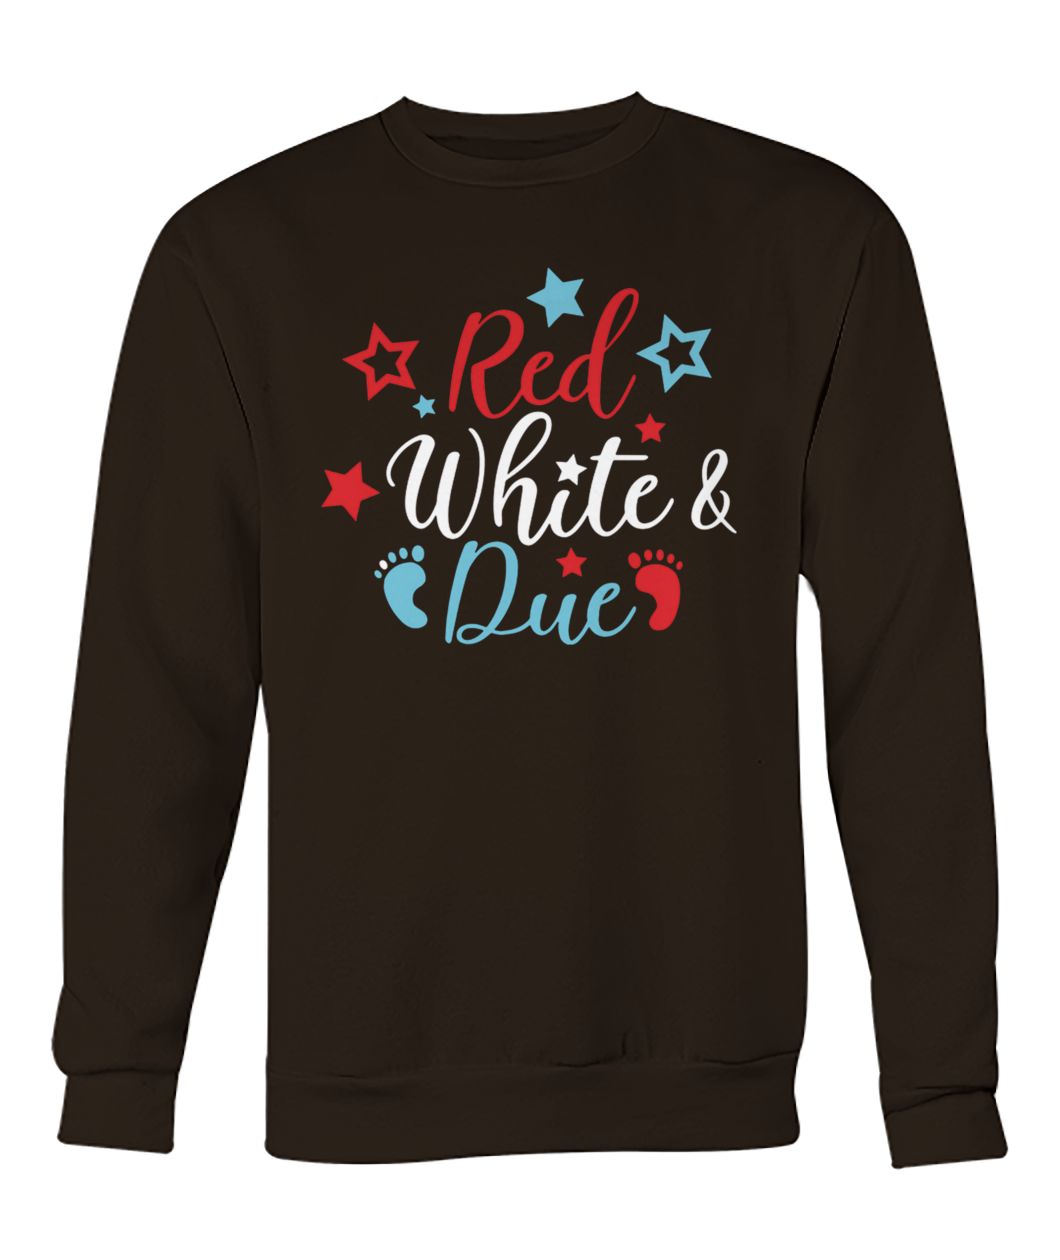 Red white and due pregnancy announcement crew neck sweatshirt